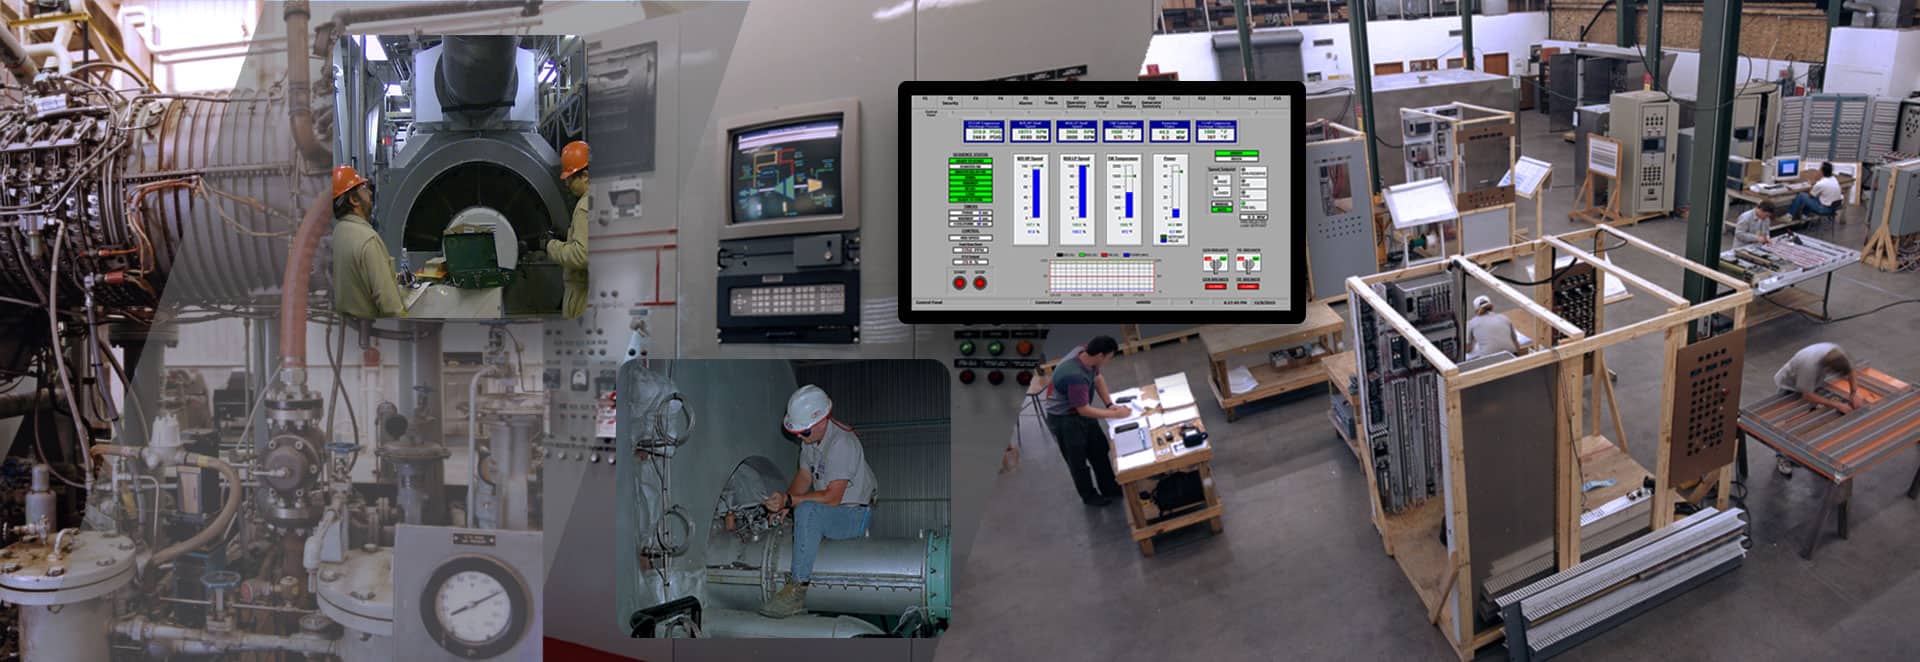 Petrotech Control Systems